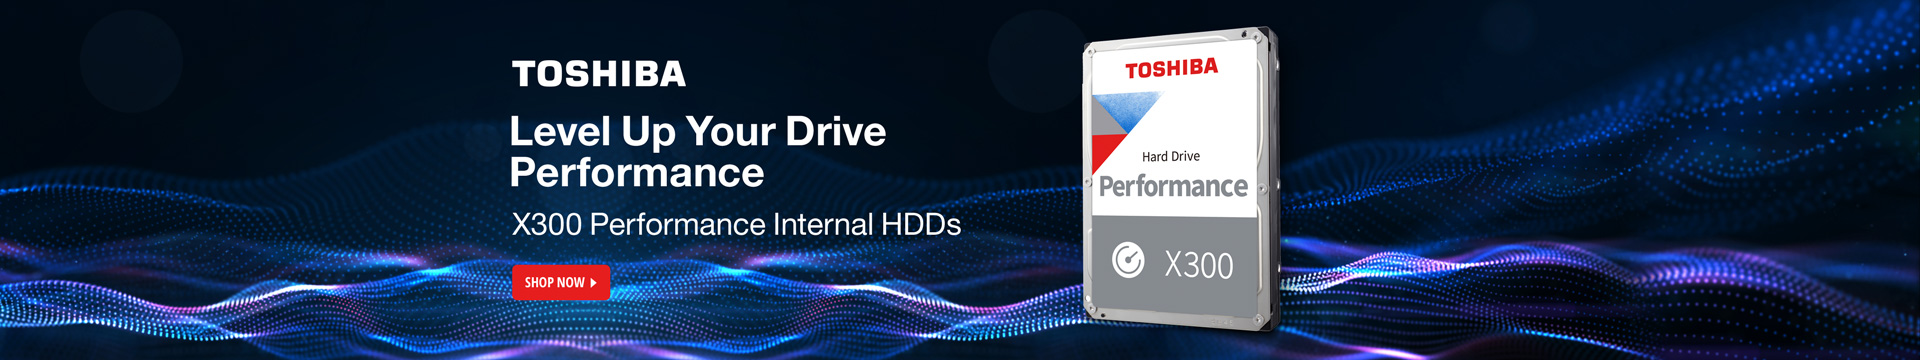 Level up your drive performance